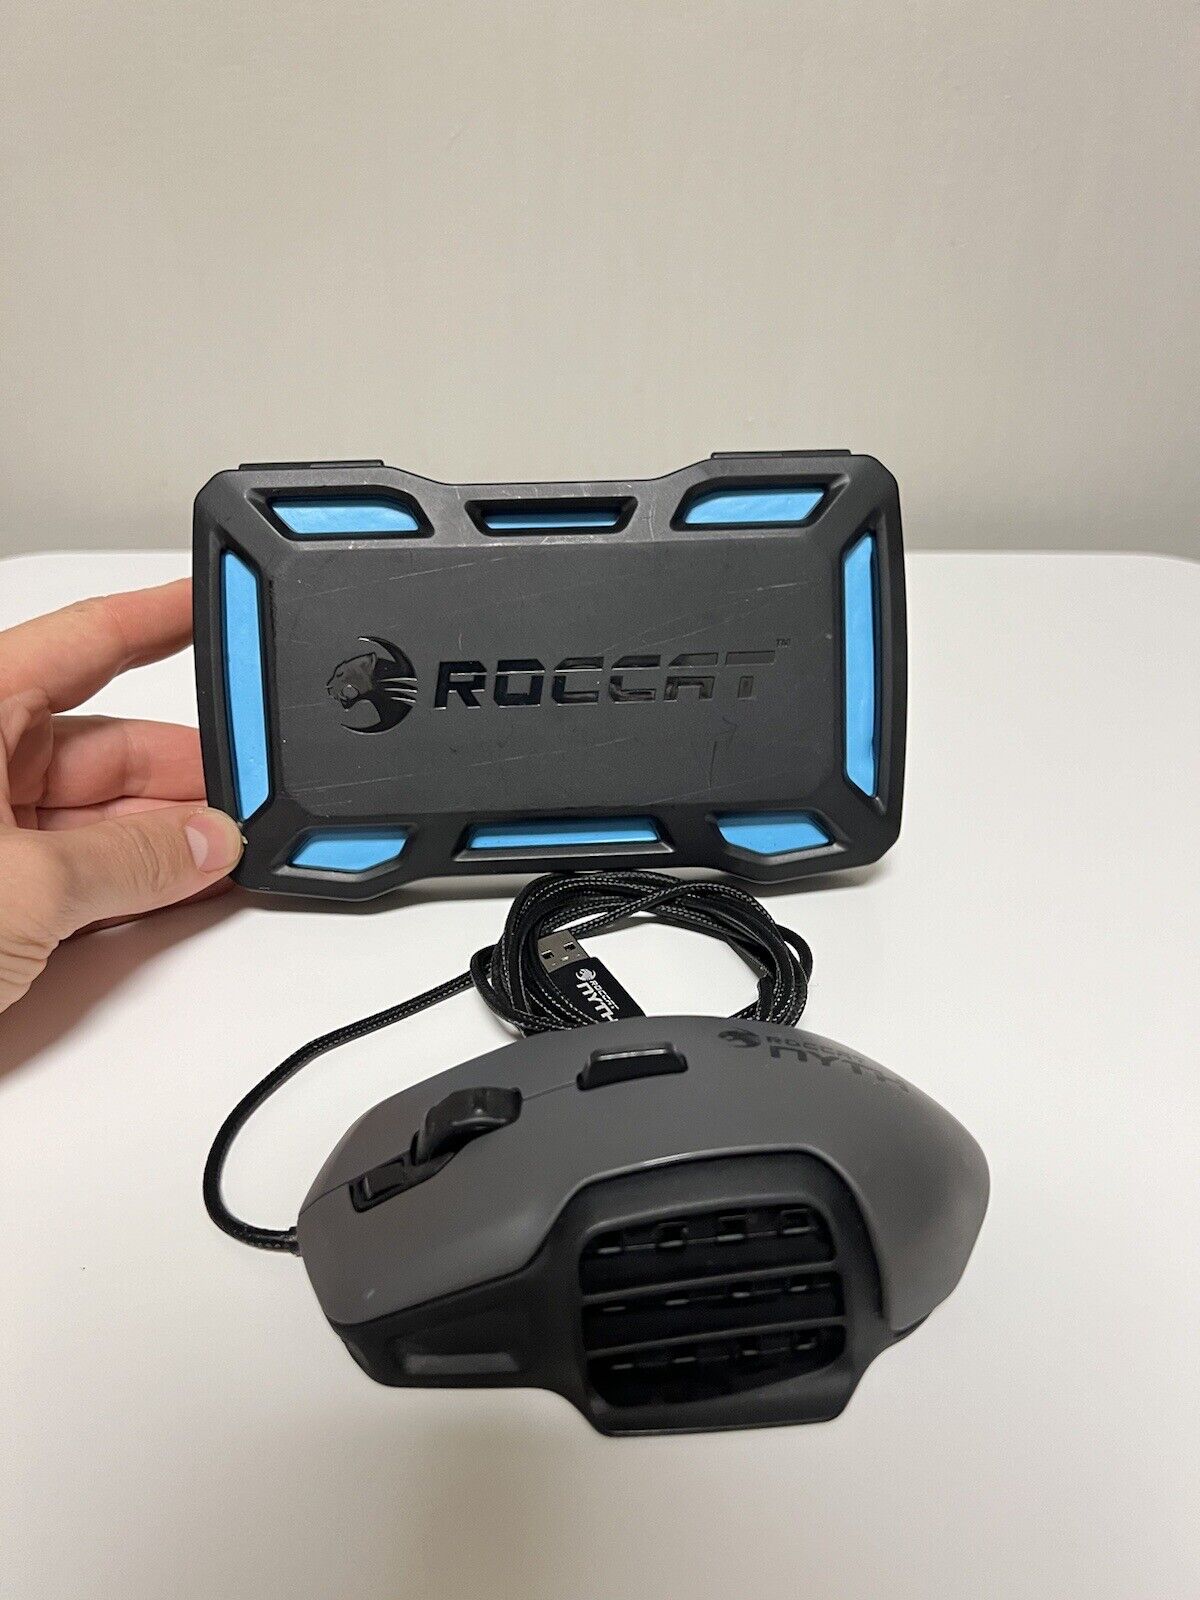 RARE ROCCAT NYTH Super Rare Low Quantity Made Mouse, Works Great